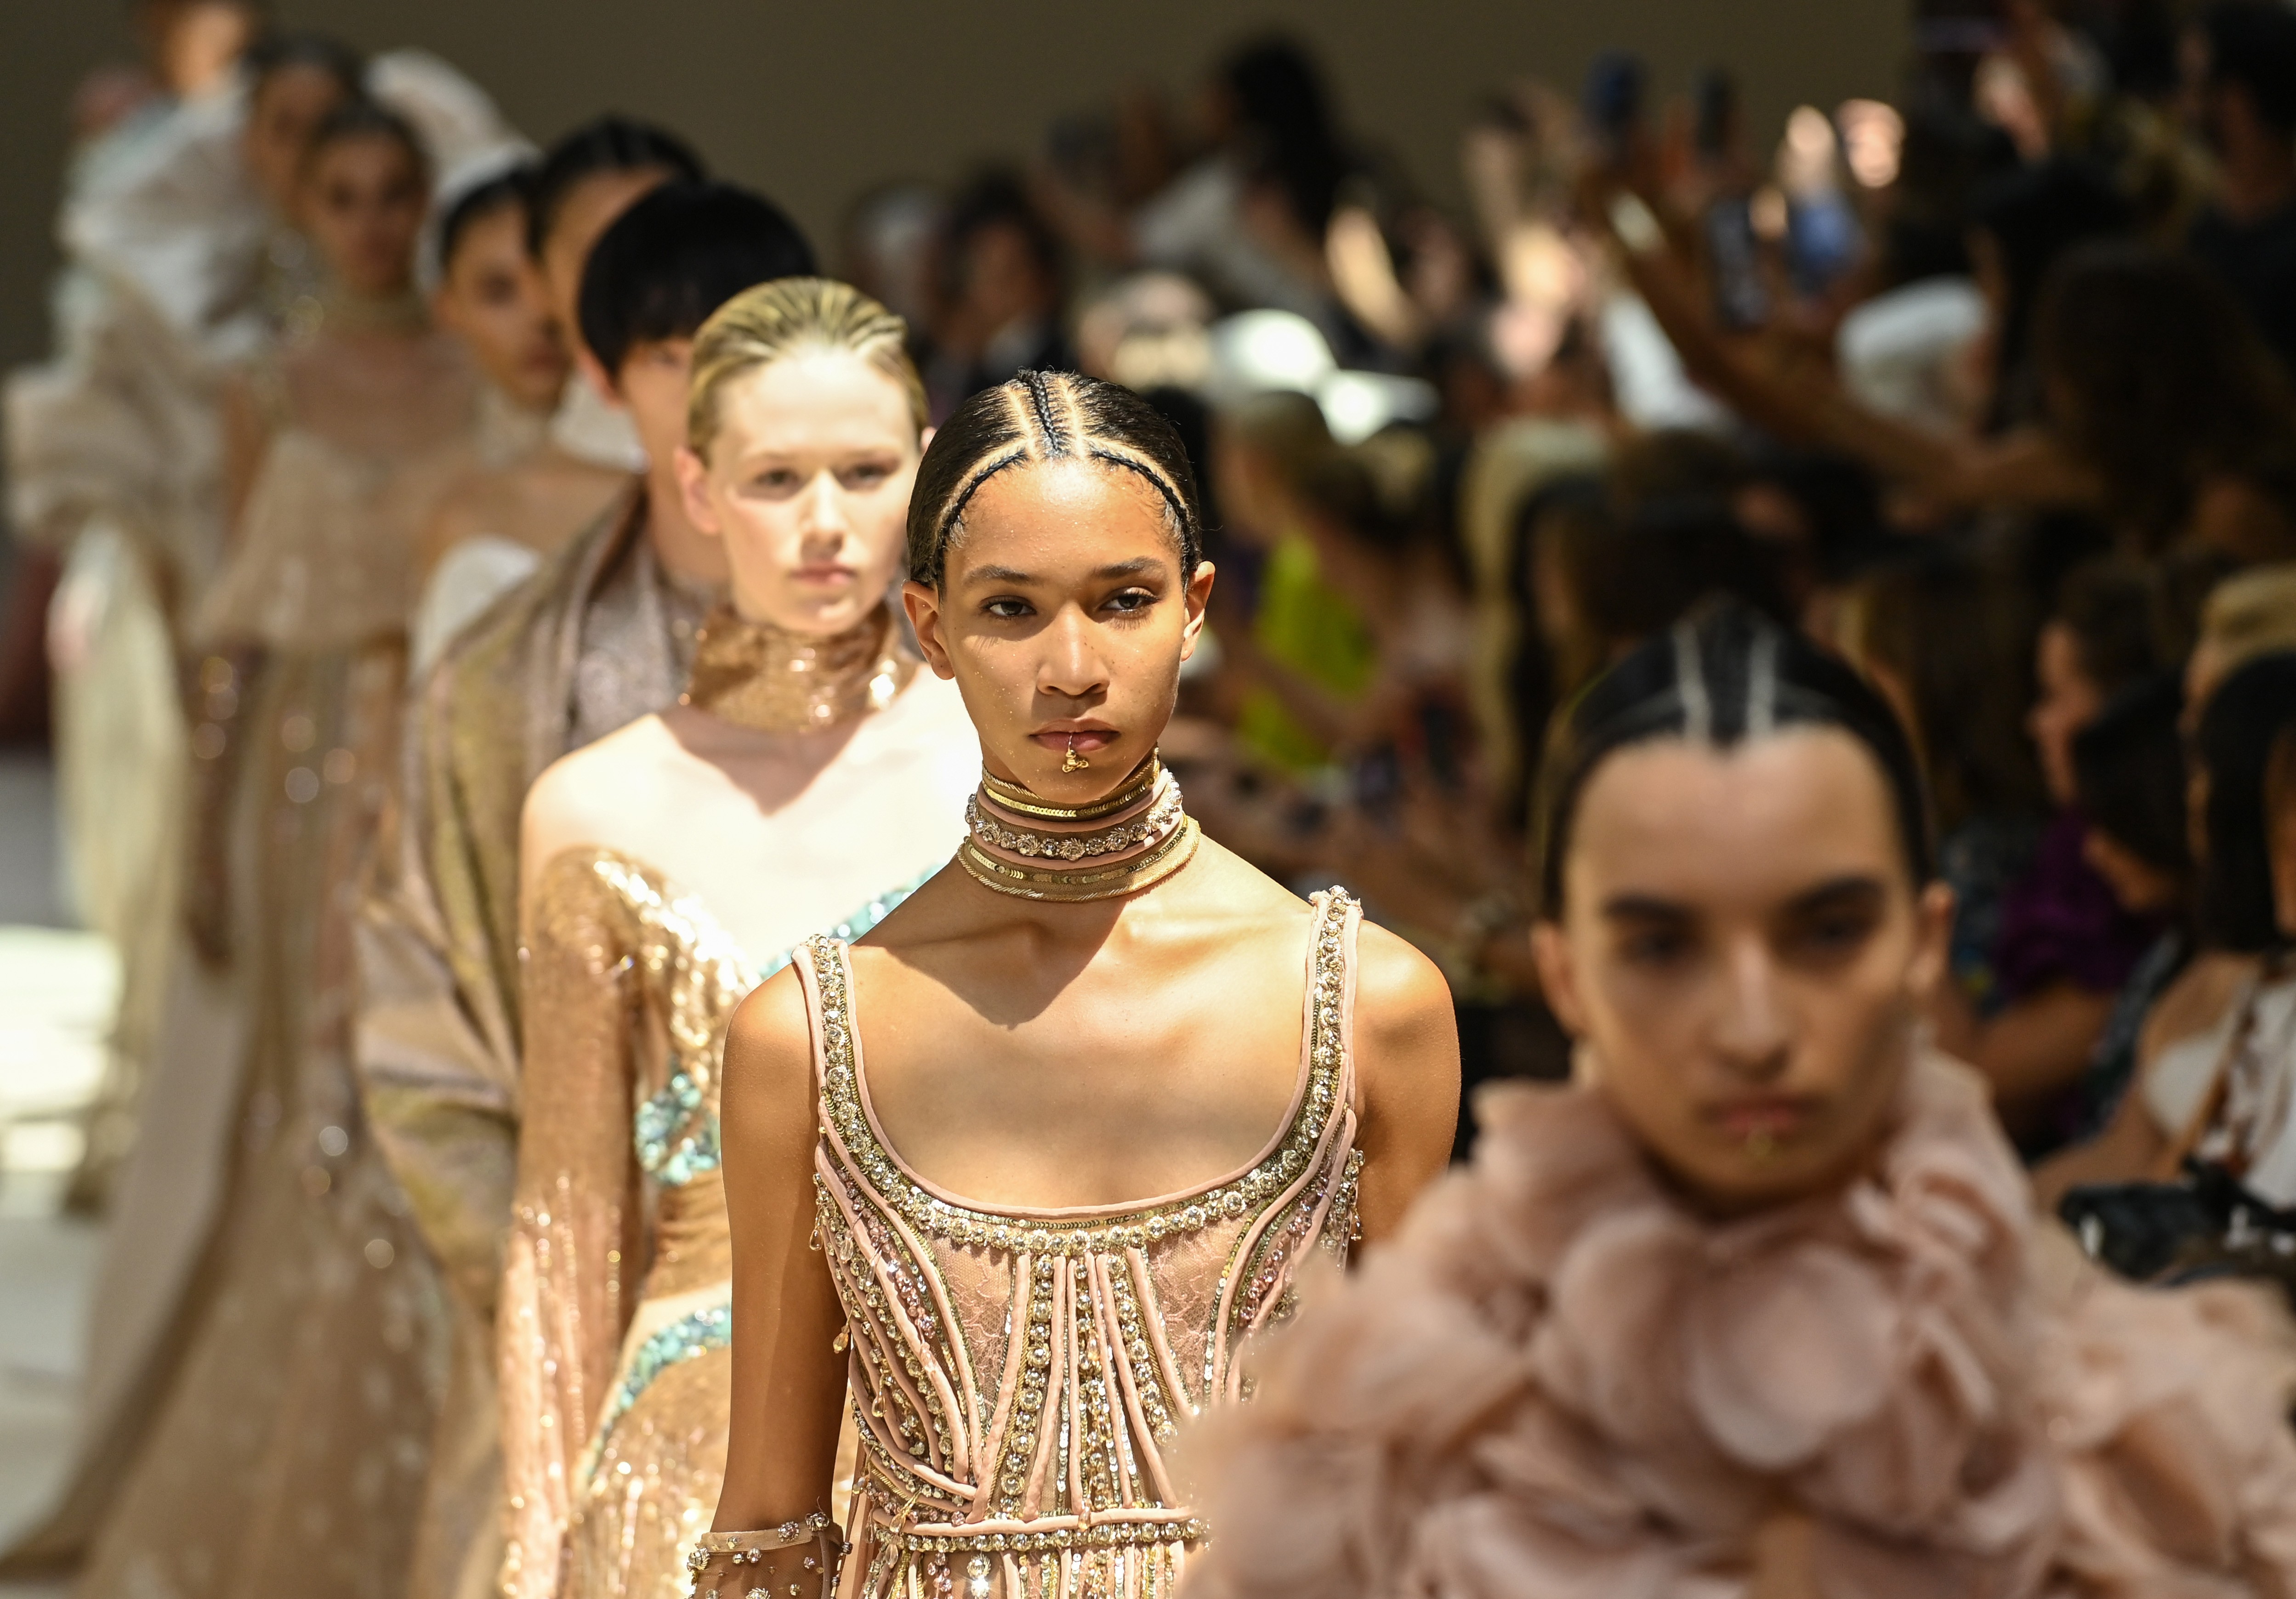 Elie Saab presents the Fall/Winter 22/23 haute couture show (Photo: Getty Images)